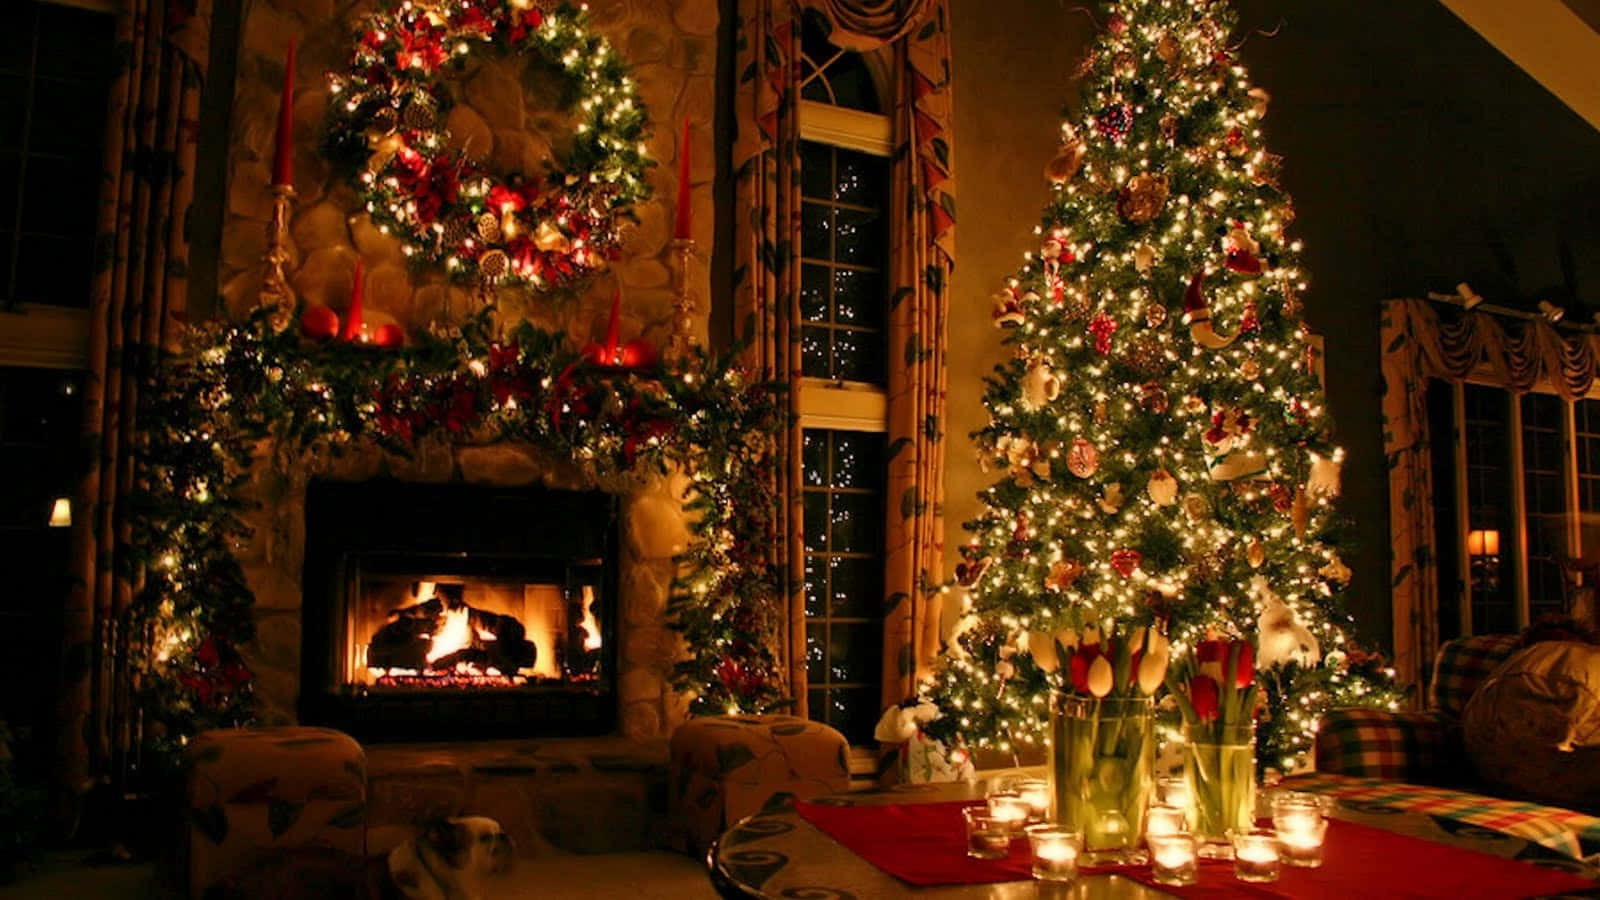 Christmas Tree In The Living Room With Fireplace Wallpaper